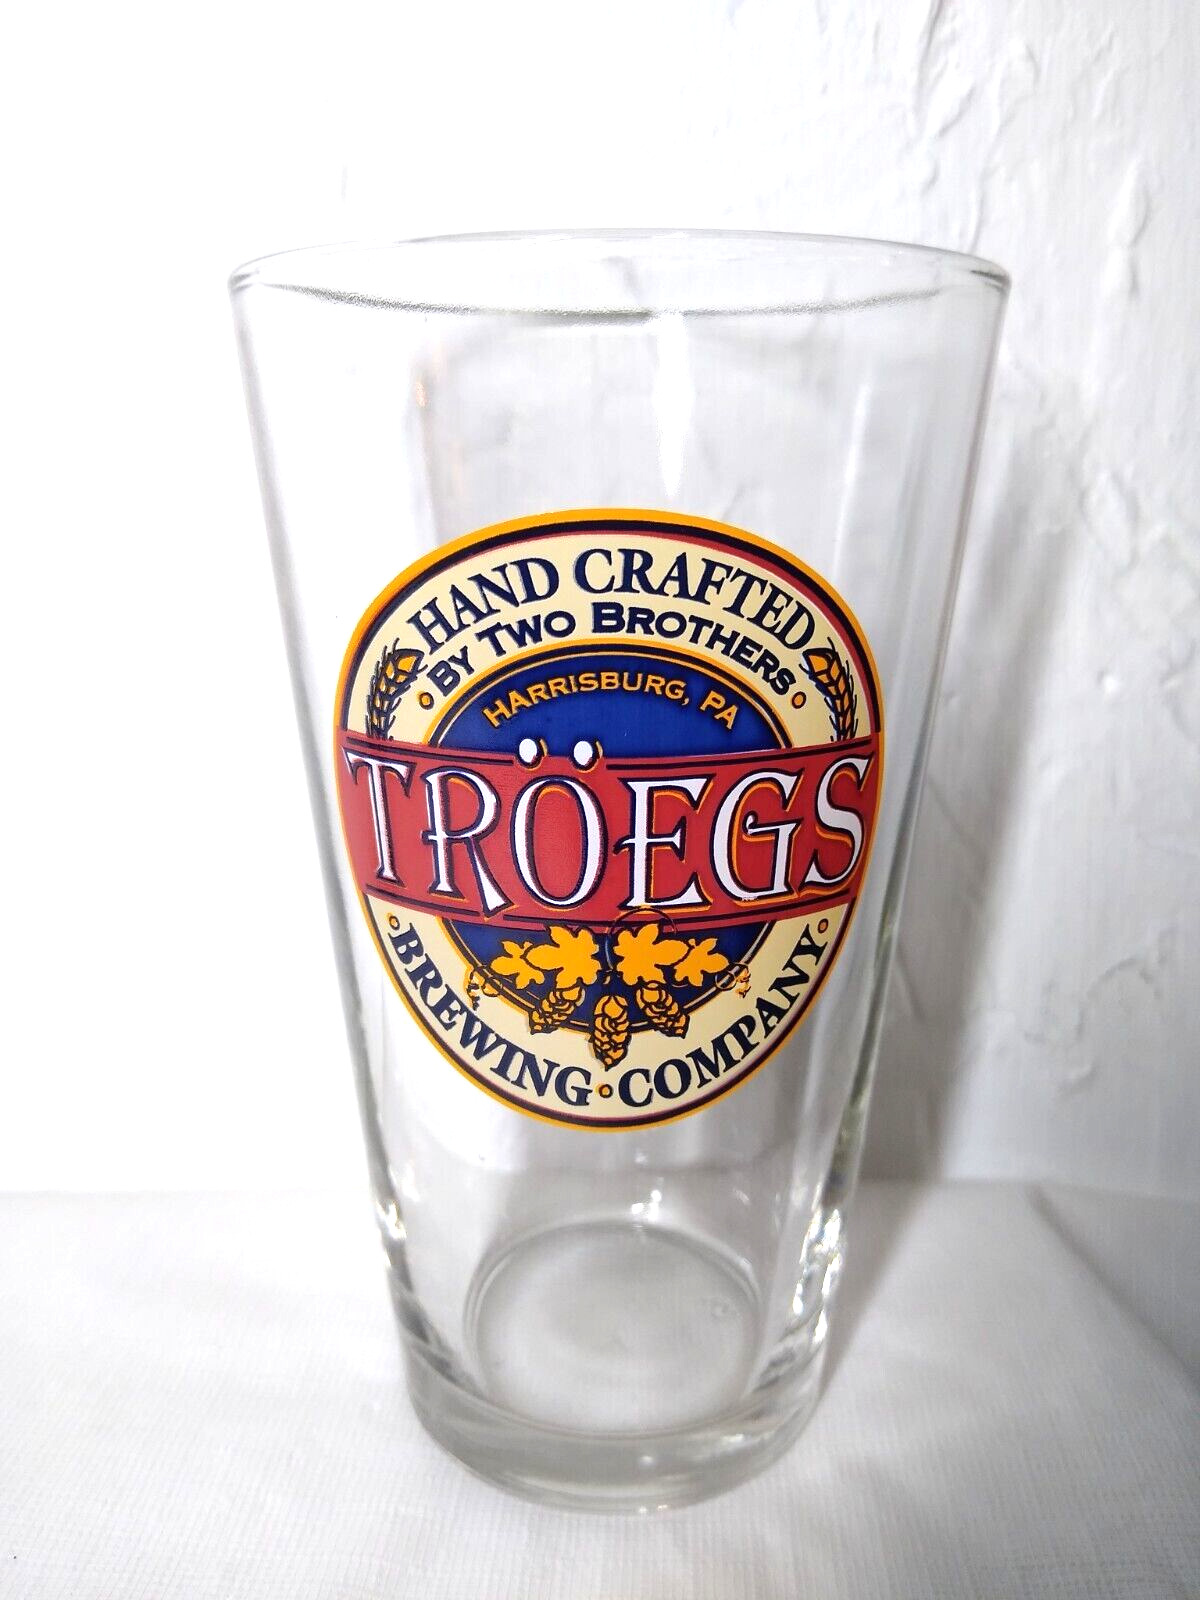 Troegs Brewing Co. Beer Glass Two Bros. Harrisburg, Pa  Approx. 12 Oz. Fast Ship